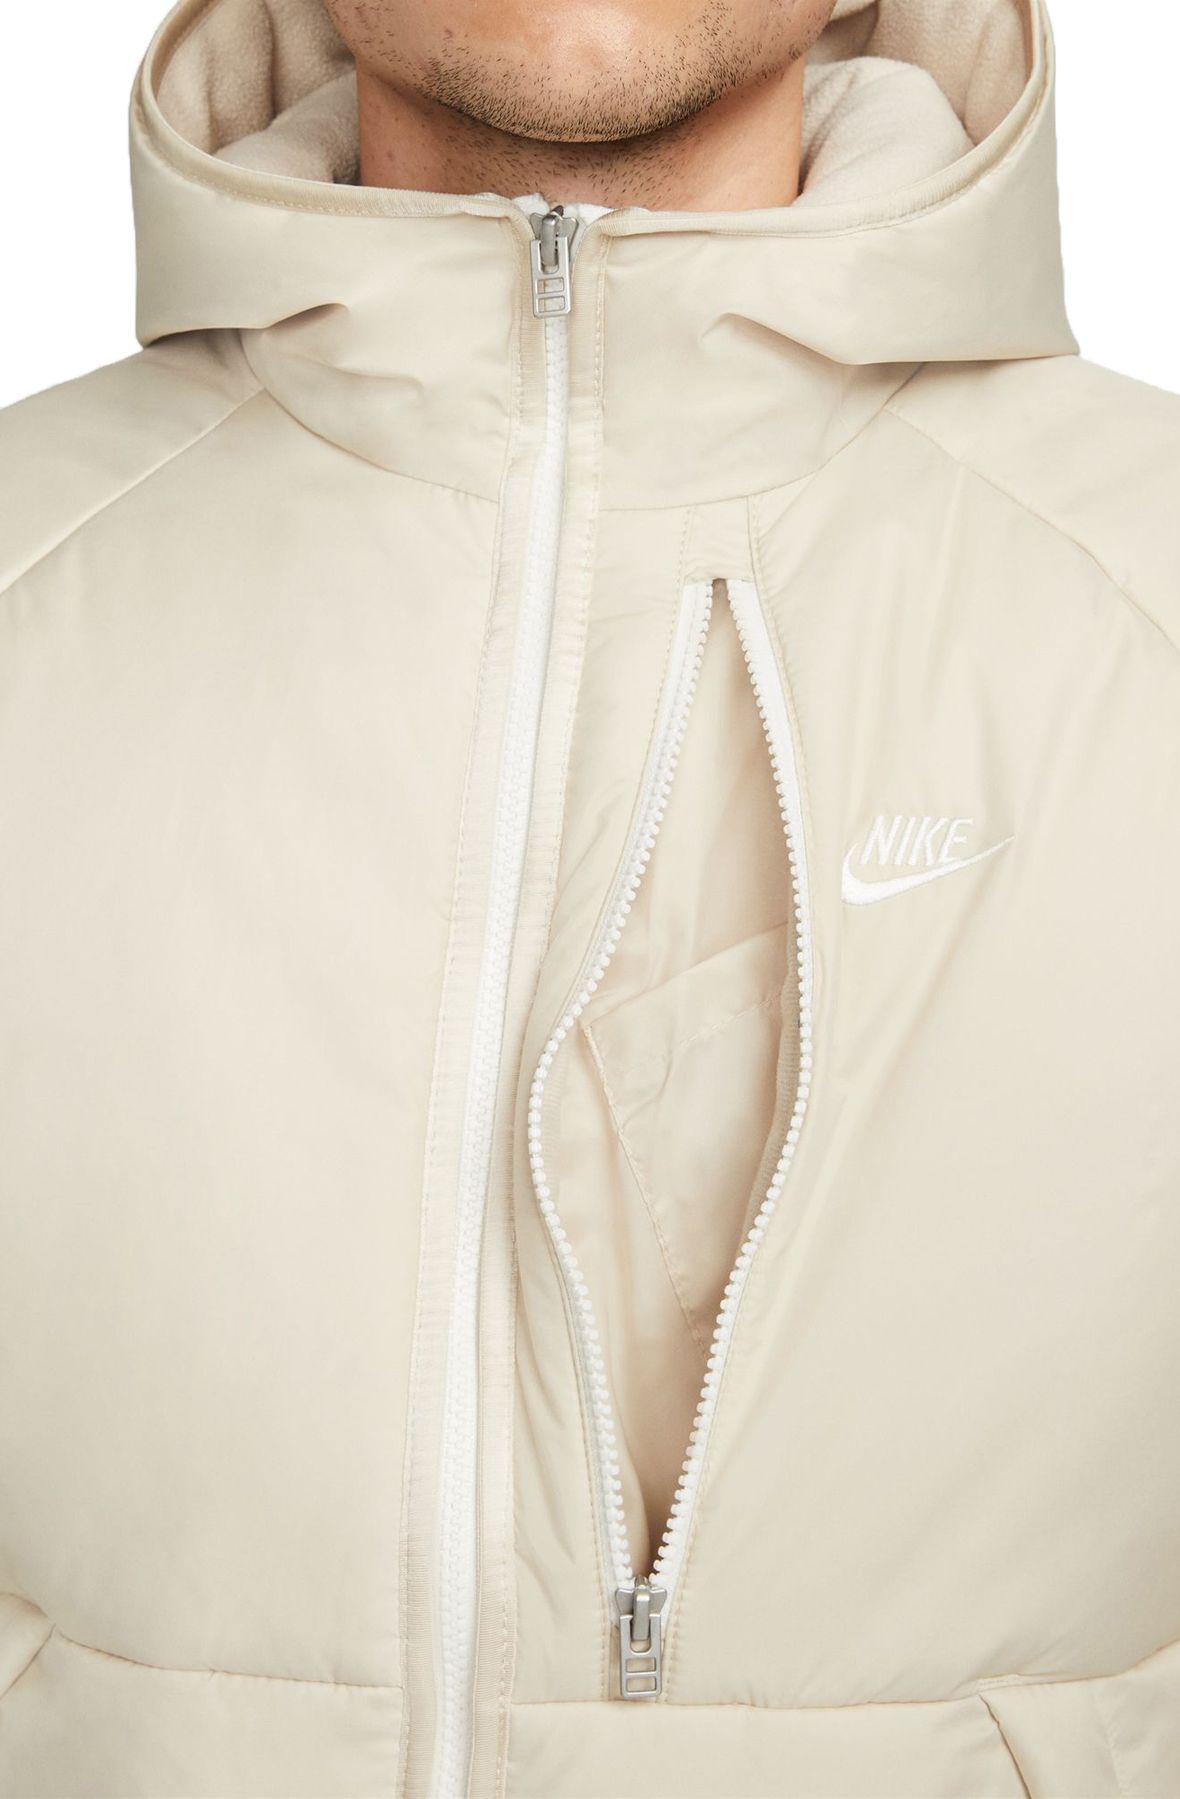 NEW NIKE Sportswear Therma-FIT Repel Full-Zip Puffer Jacket sz MED Rough  Green